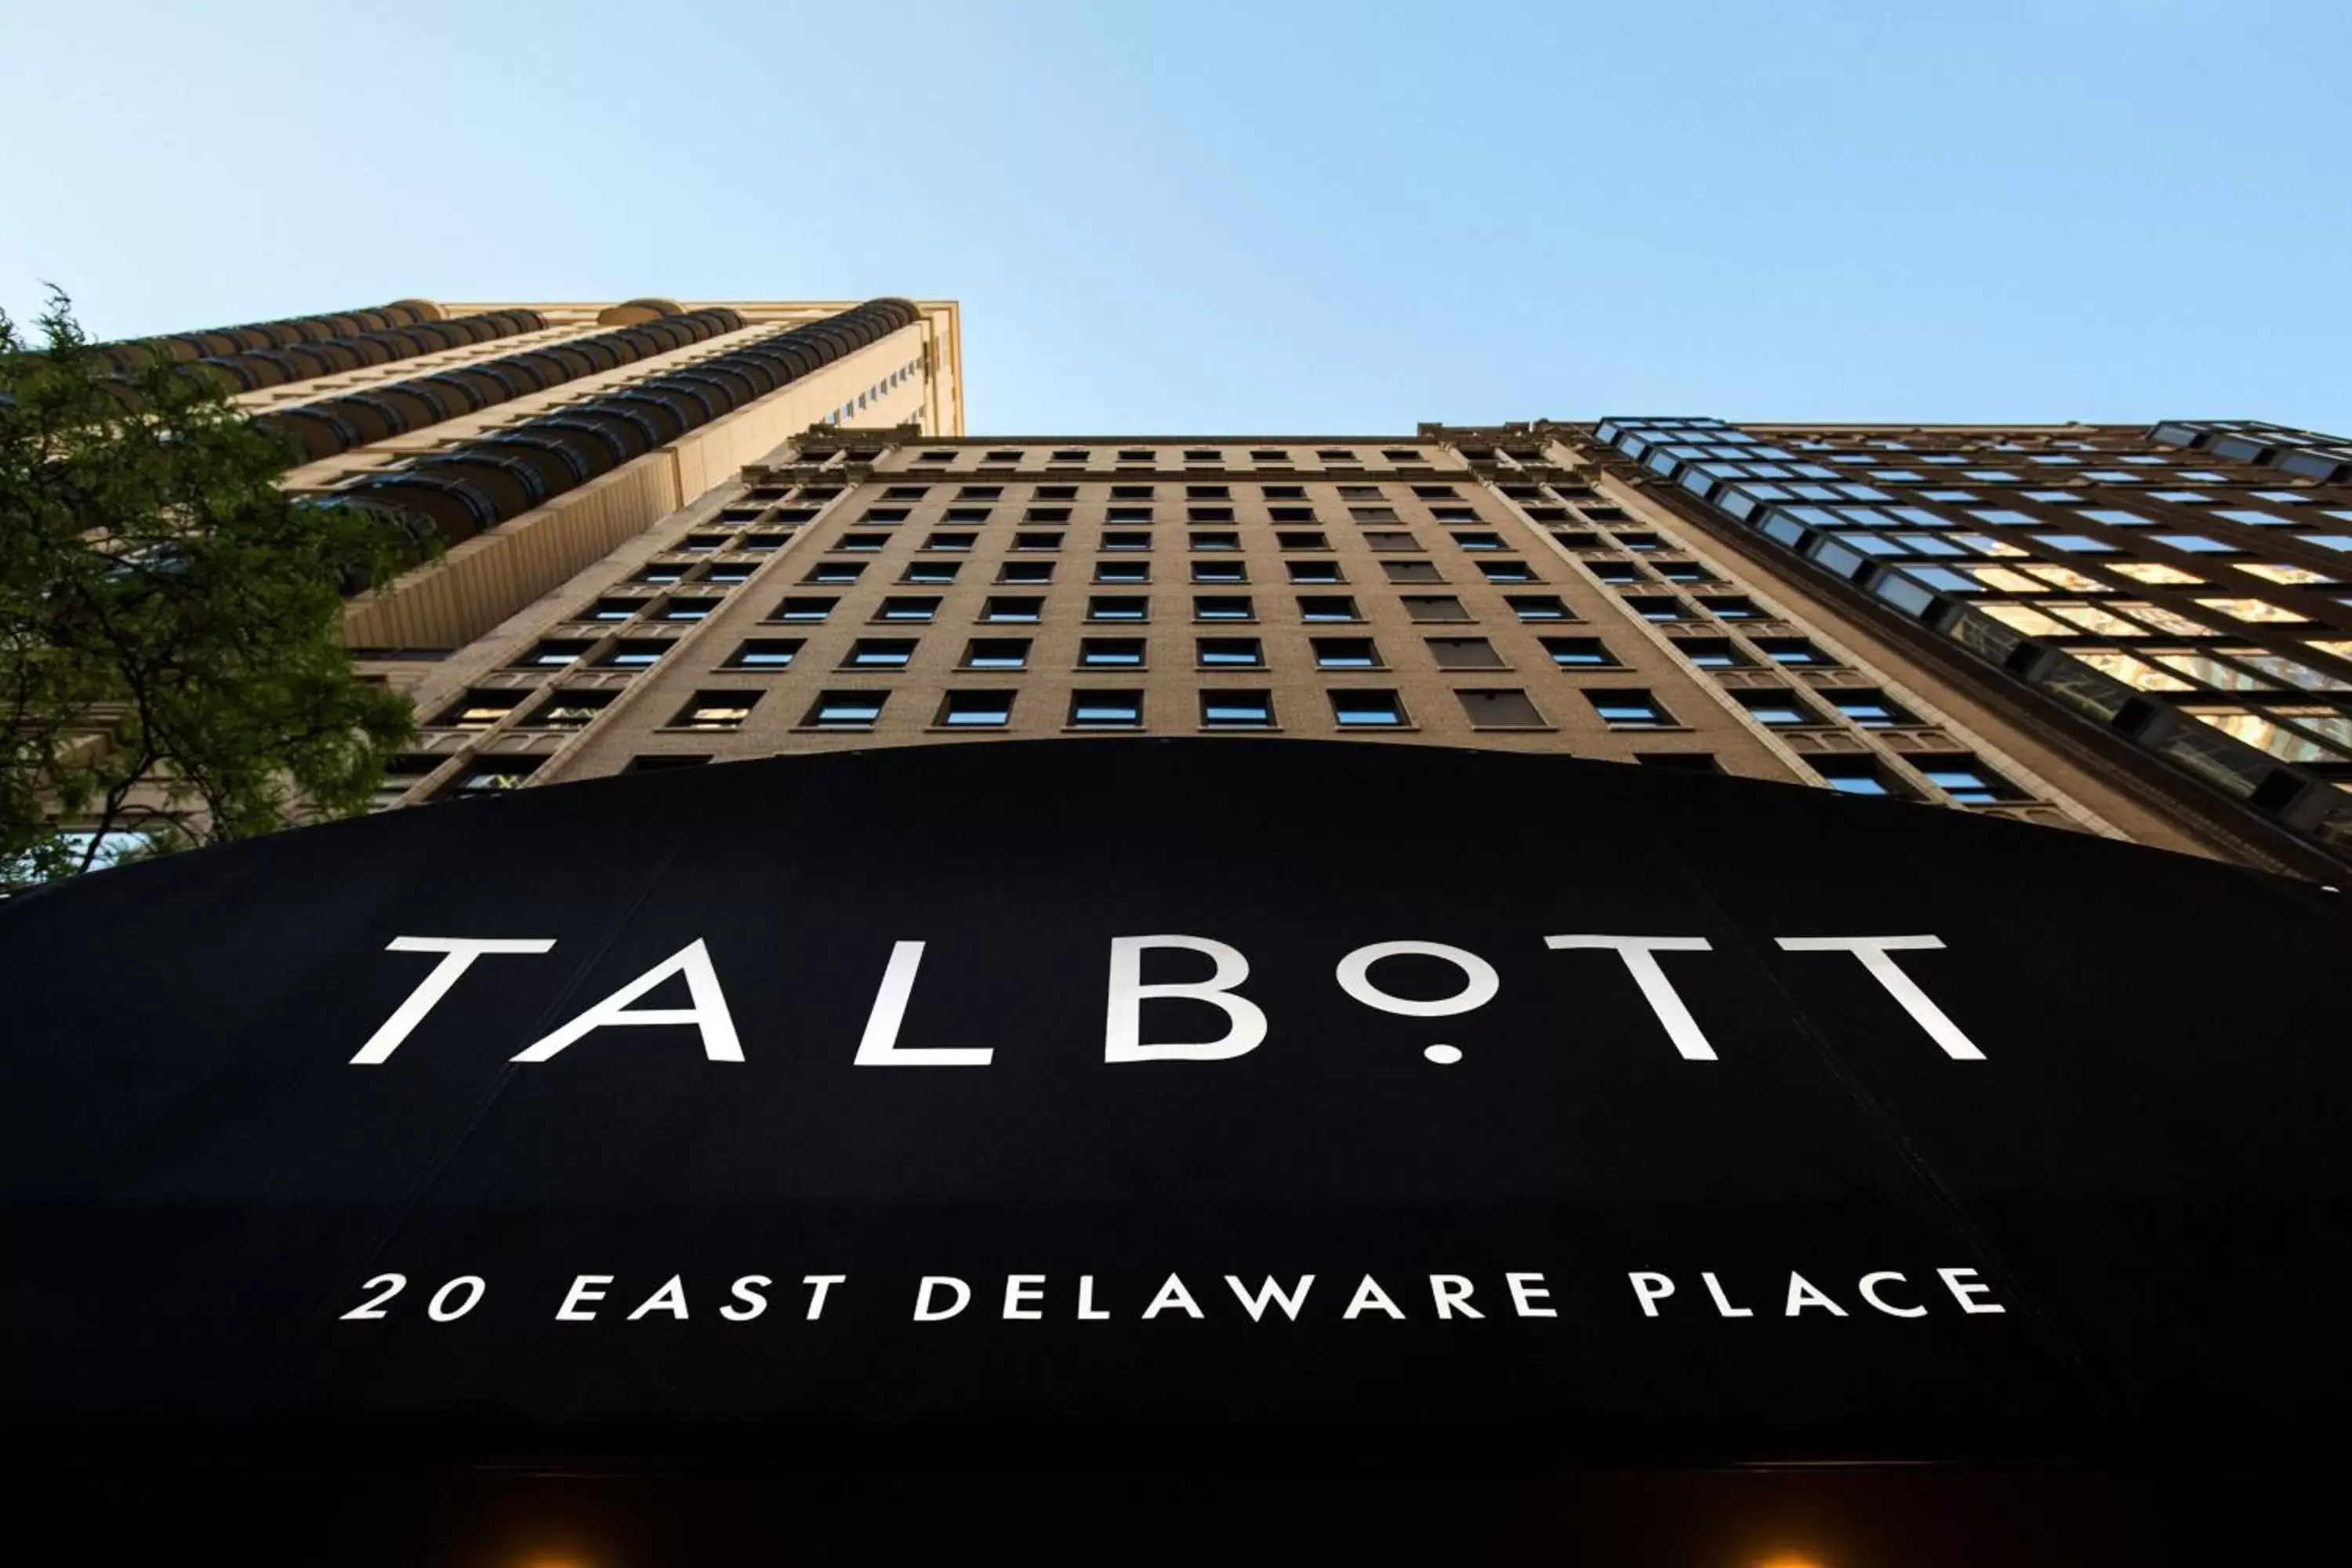 Property Building in The Talbott Hotel